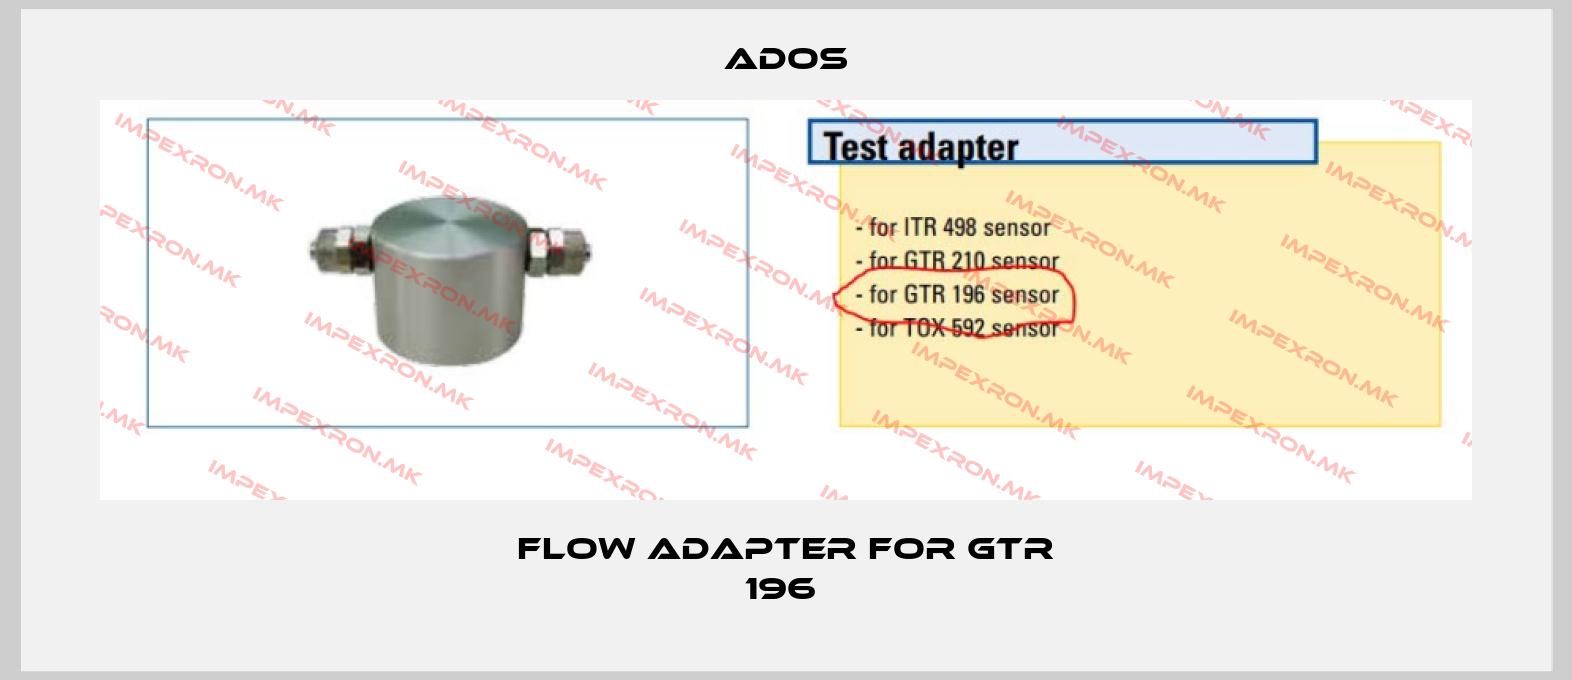 Ados-Flow adapter for GTR 196 price